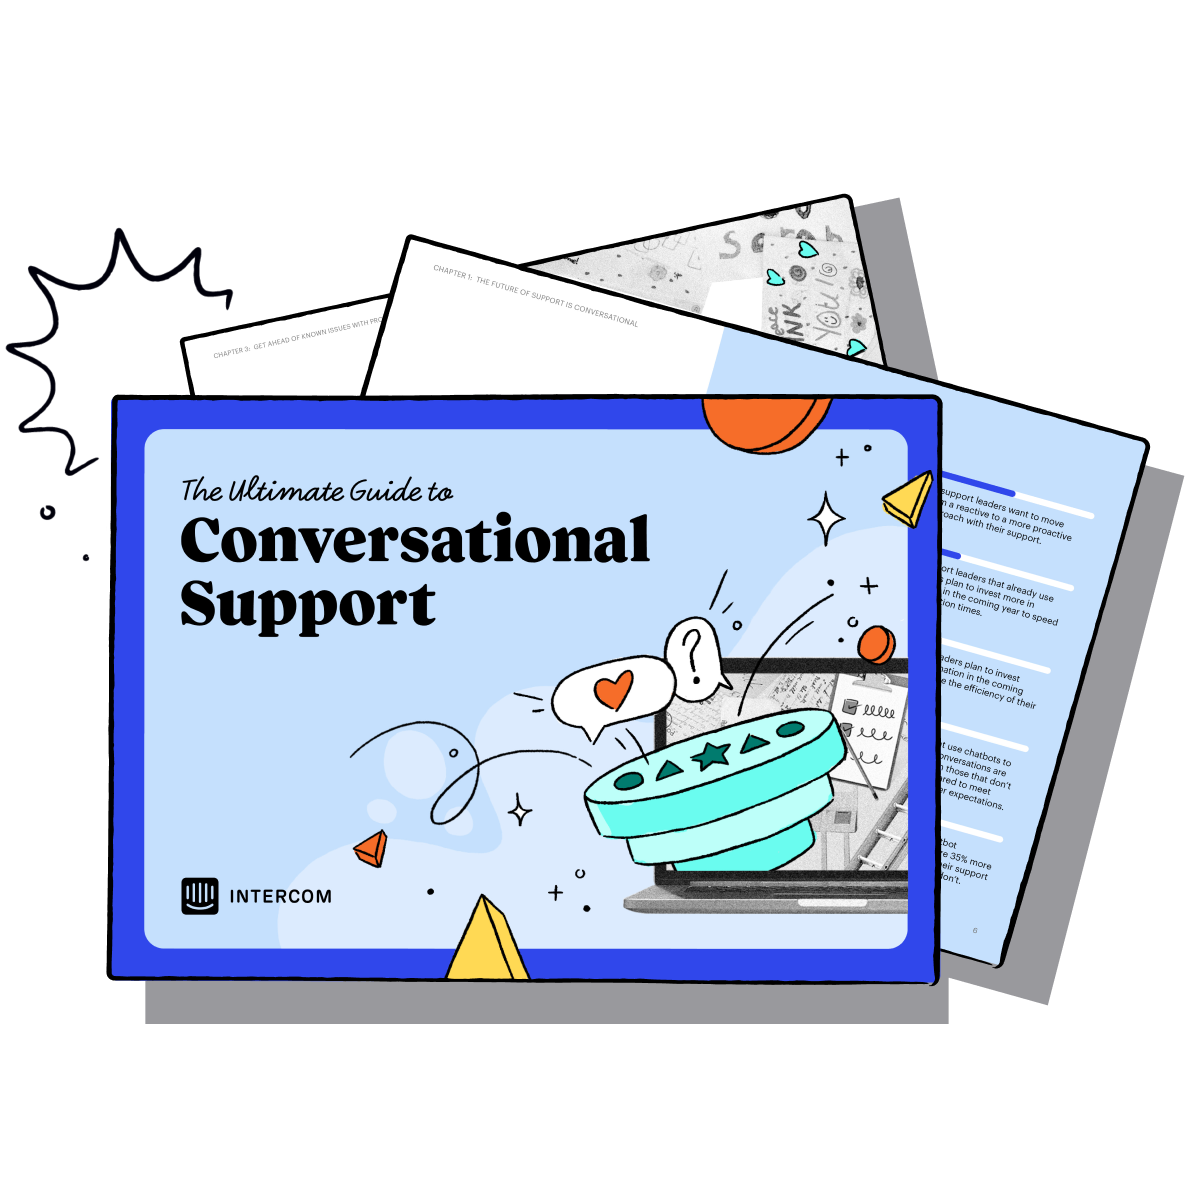 The Ultimate Guide to Conversational Support